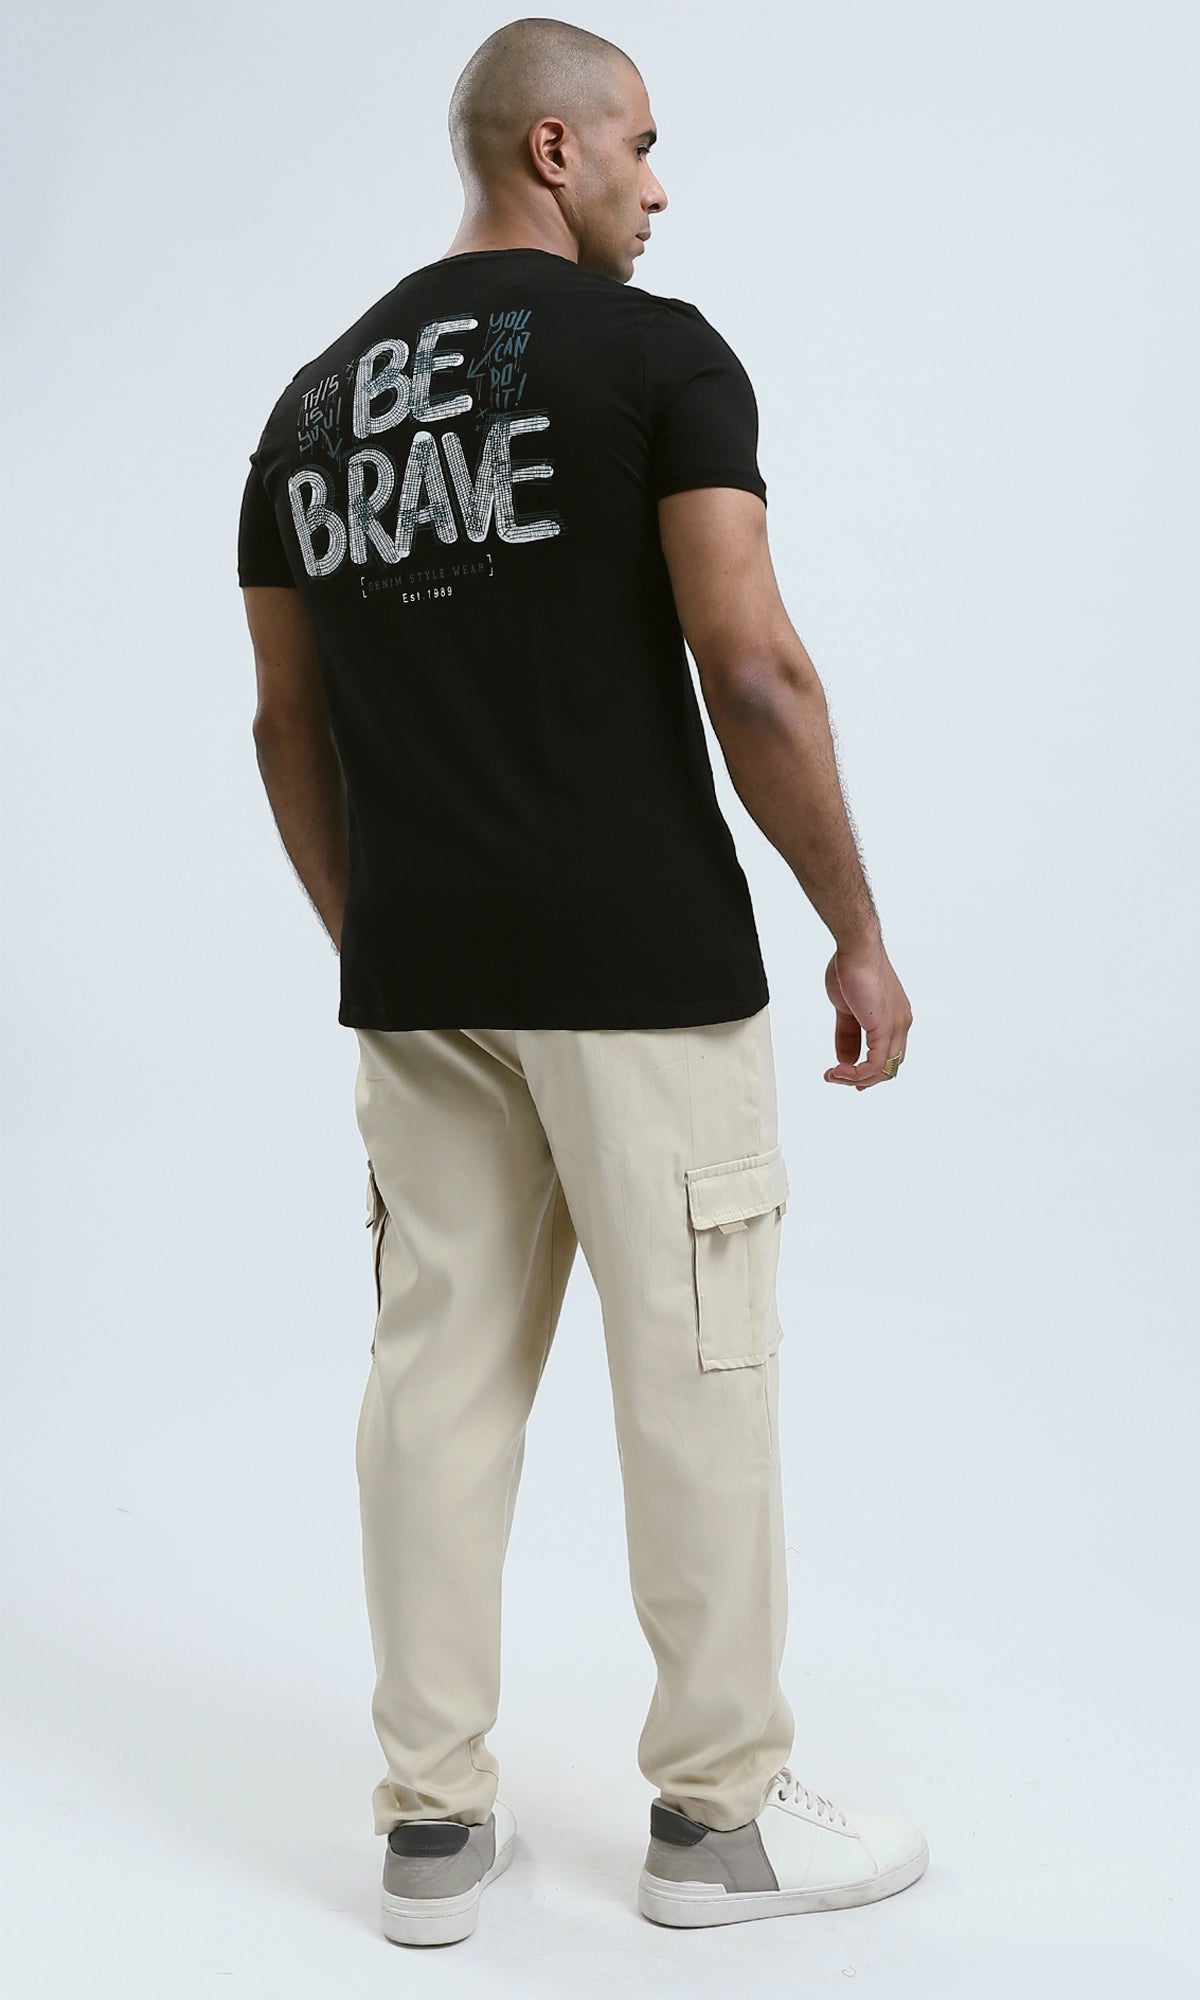 O182447 Front & Back Print "Be Brave" Black Cotton Tee